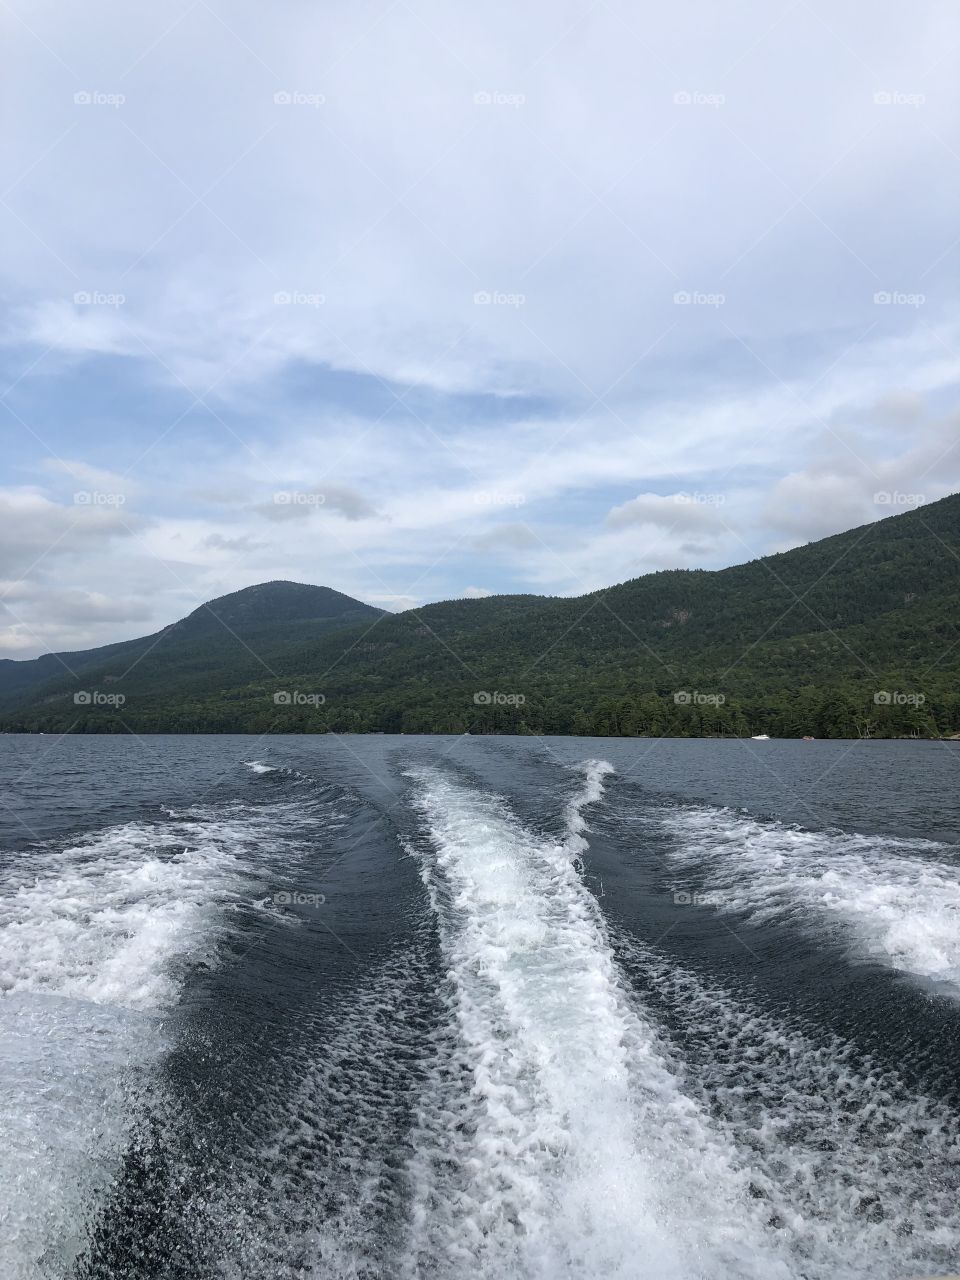 boat ride by the mountains 